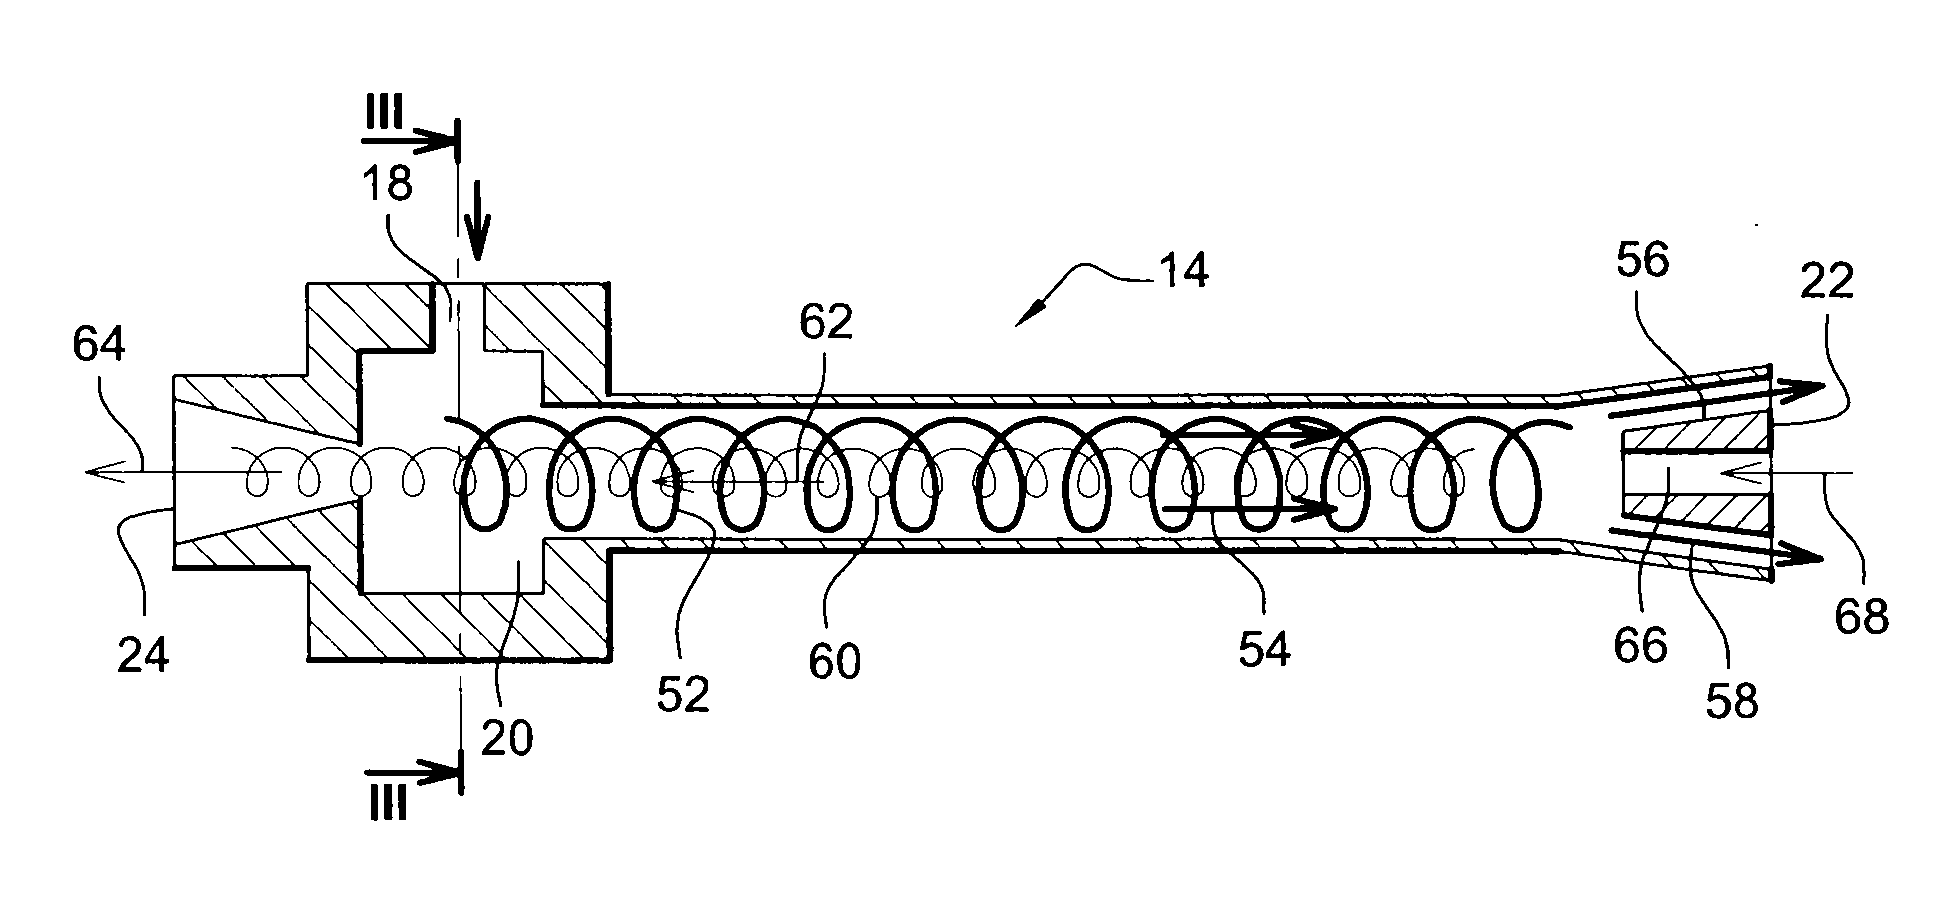 Device for cooling electrical equipment in a turbomachine